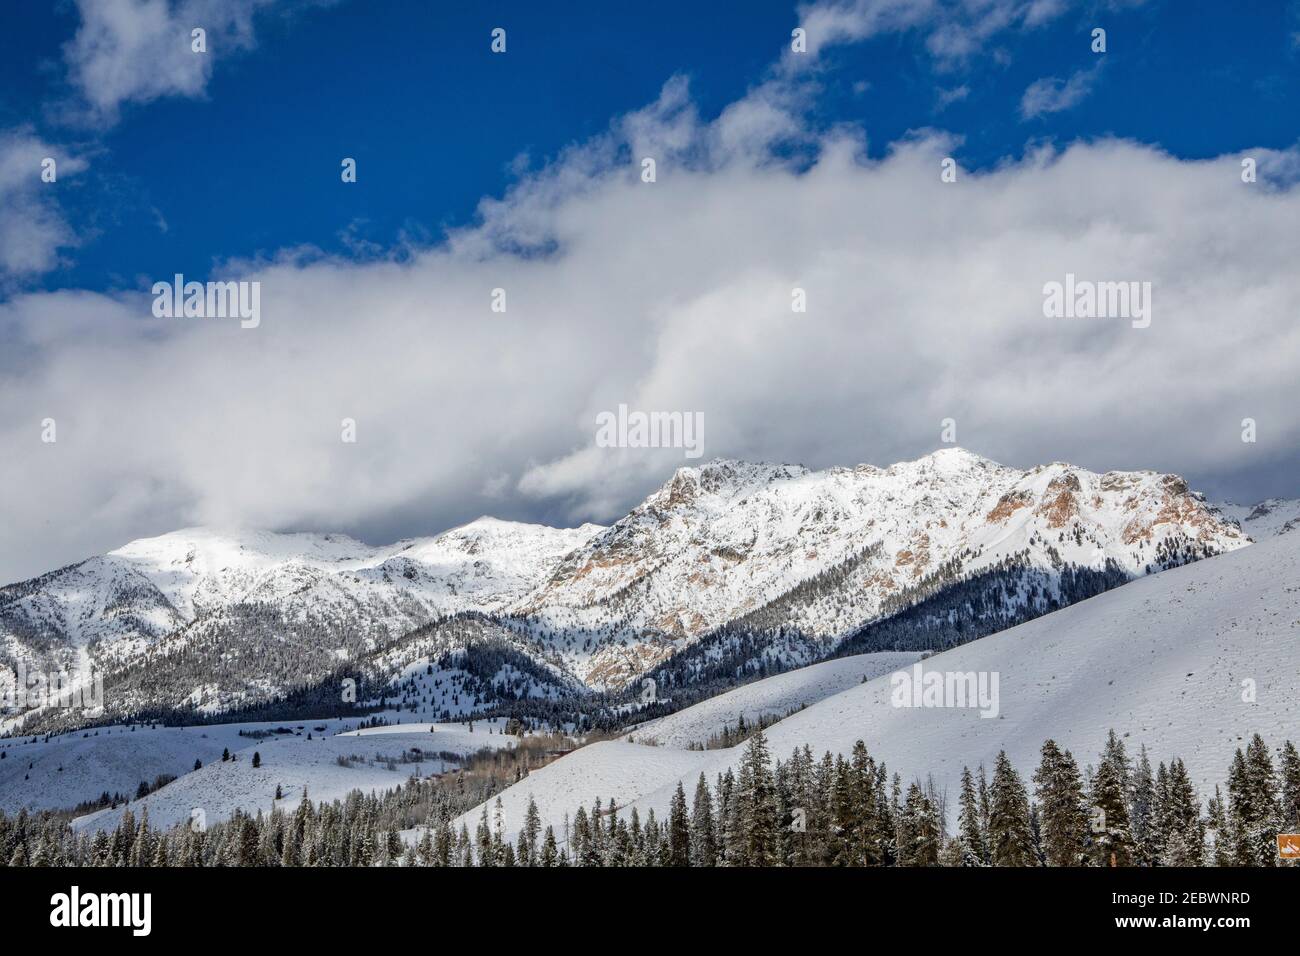 USA, Idaho, Sun Valley, Landscape with Boulder Mountains in winter Stock Photo